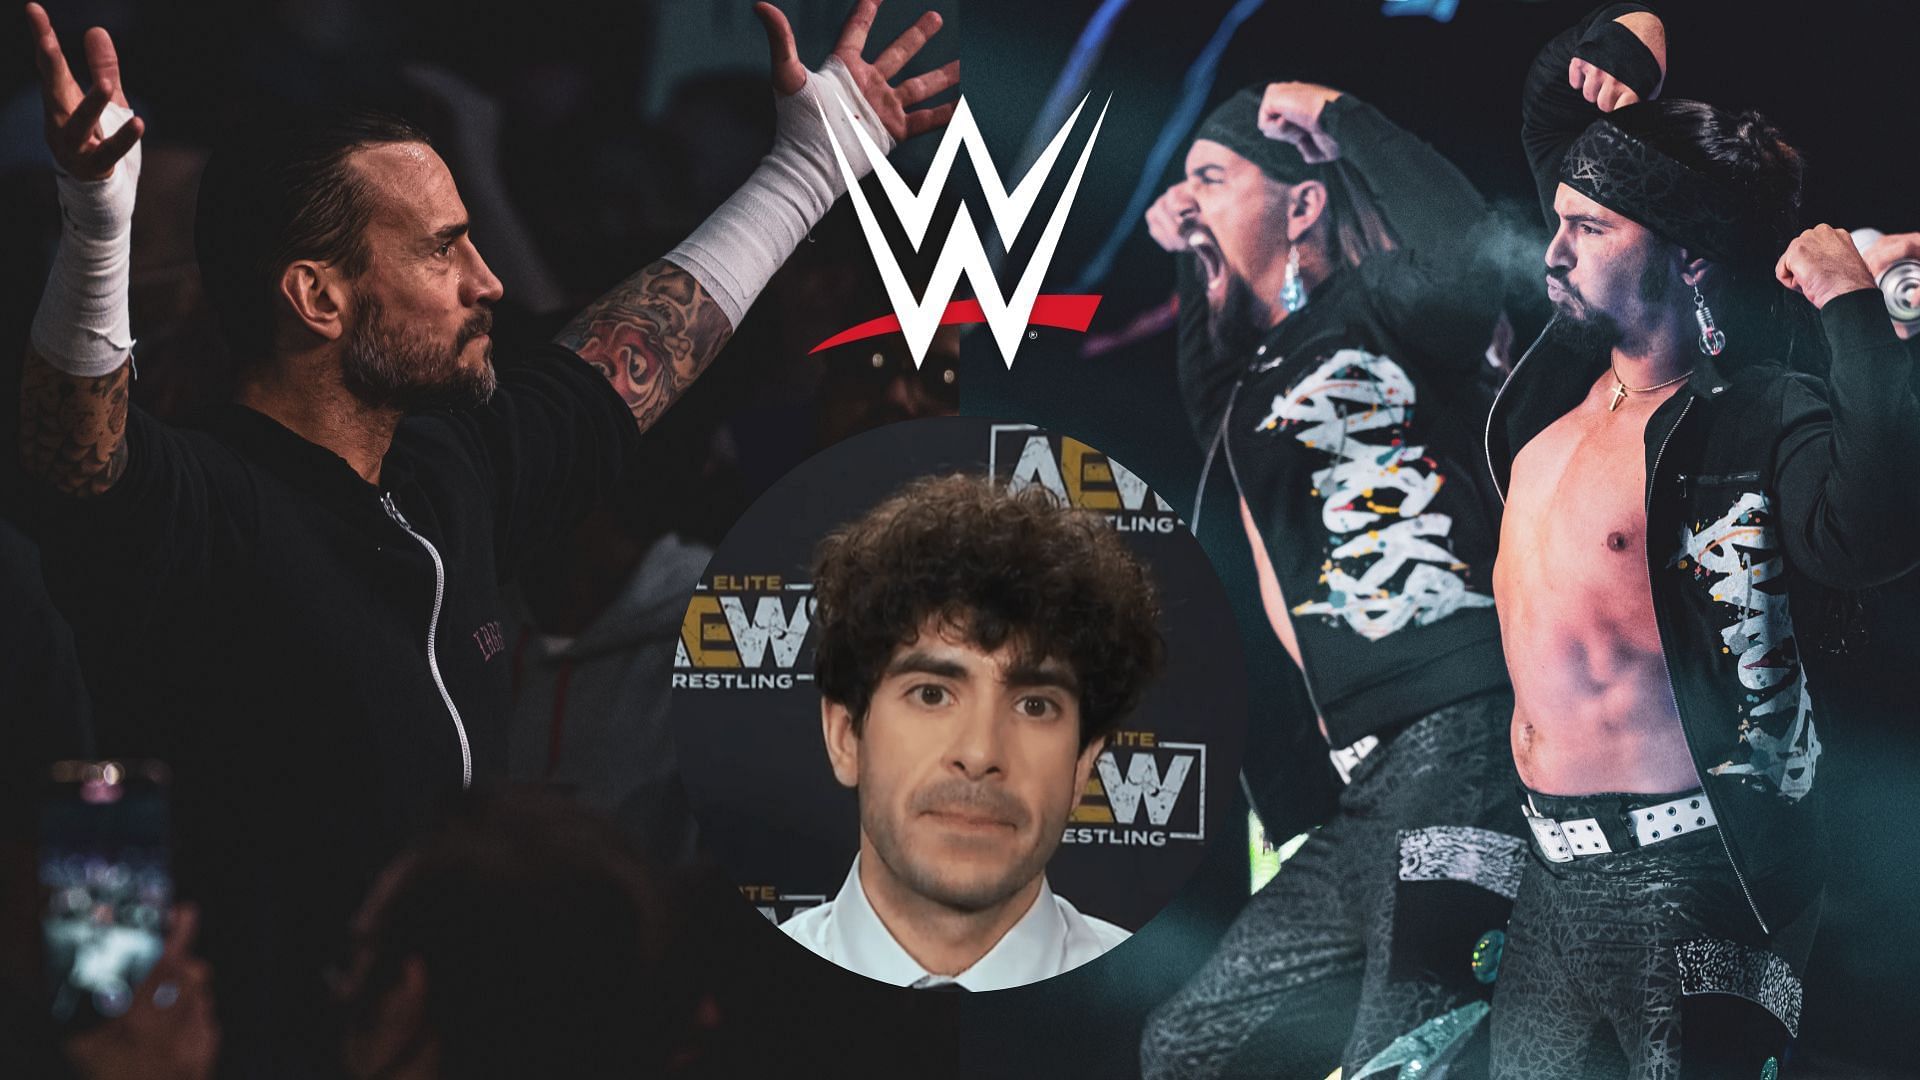 Which former WWE Superstar emailed Tony Khan after Brawl Out?